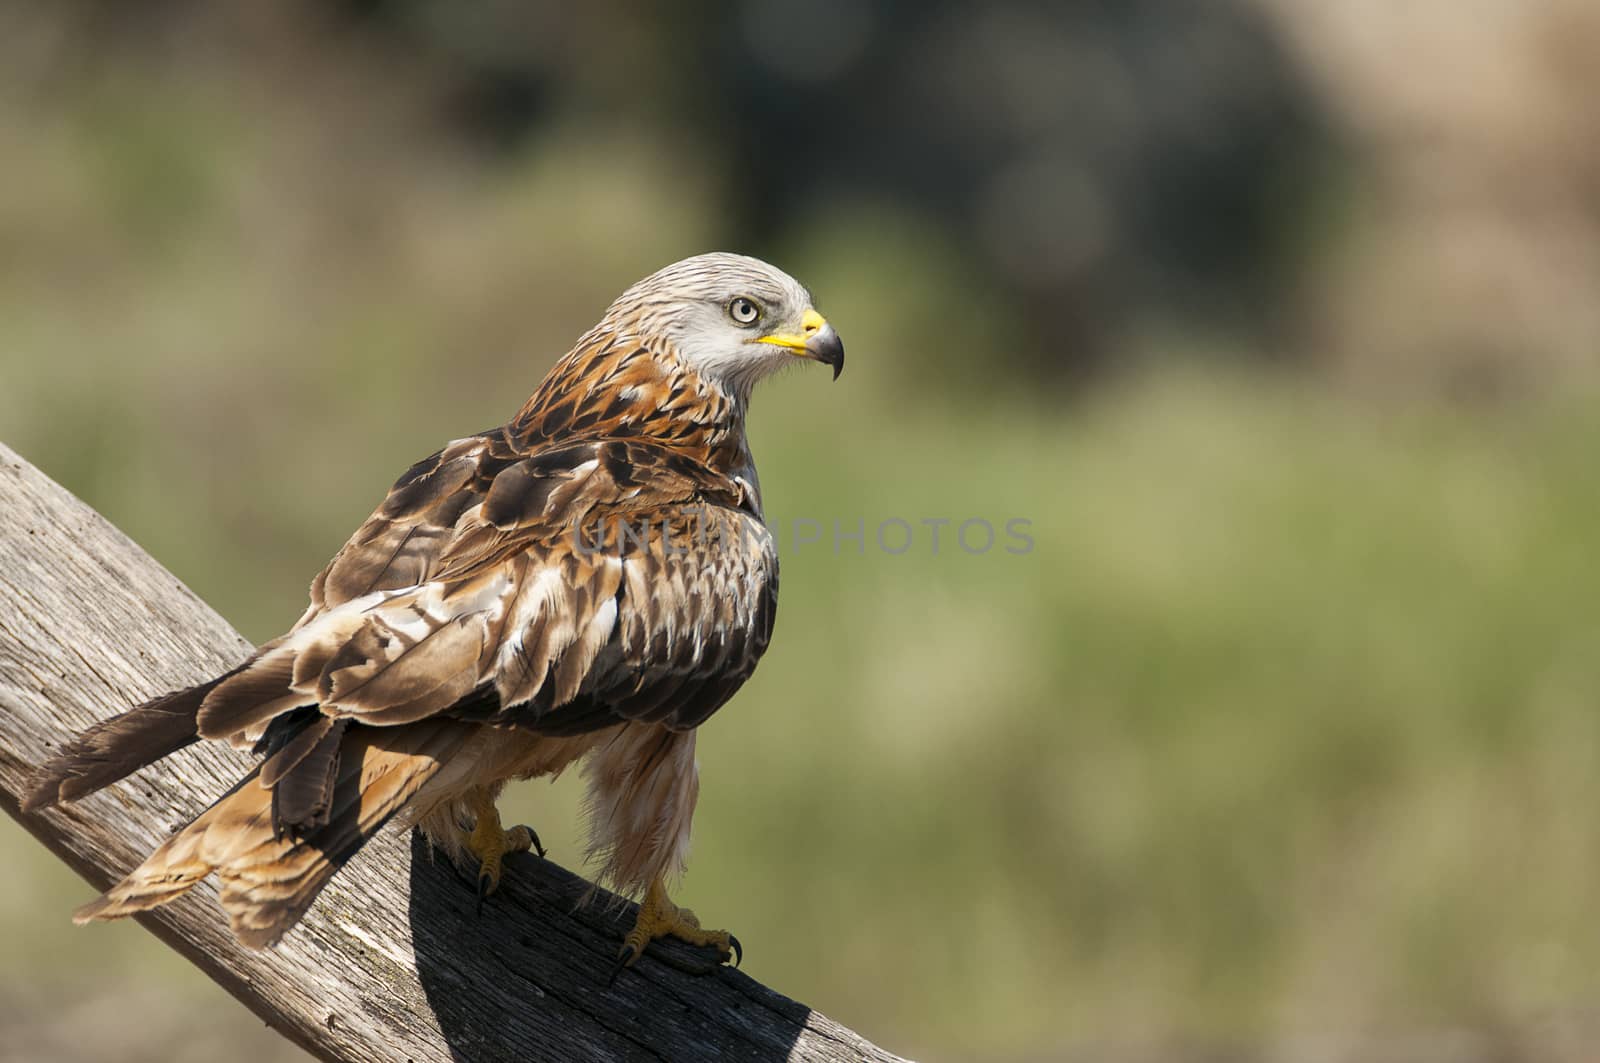 Red kite, Milvus milvus, perched on a branch